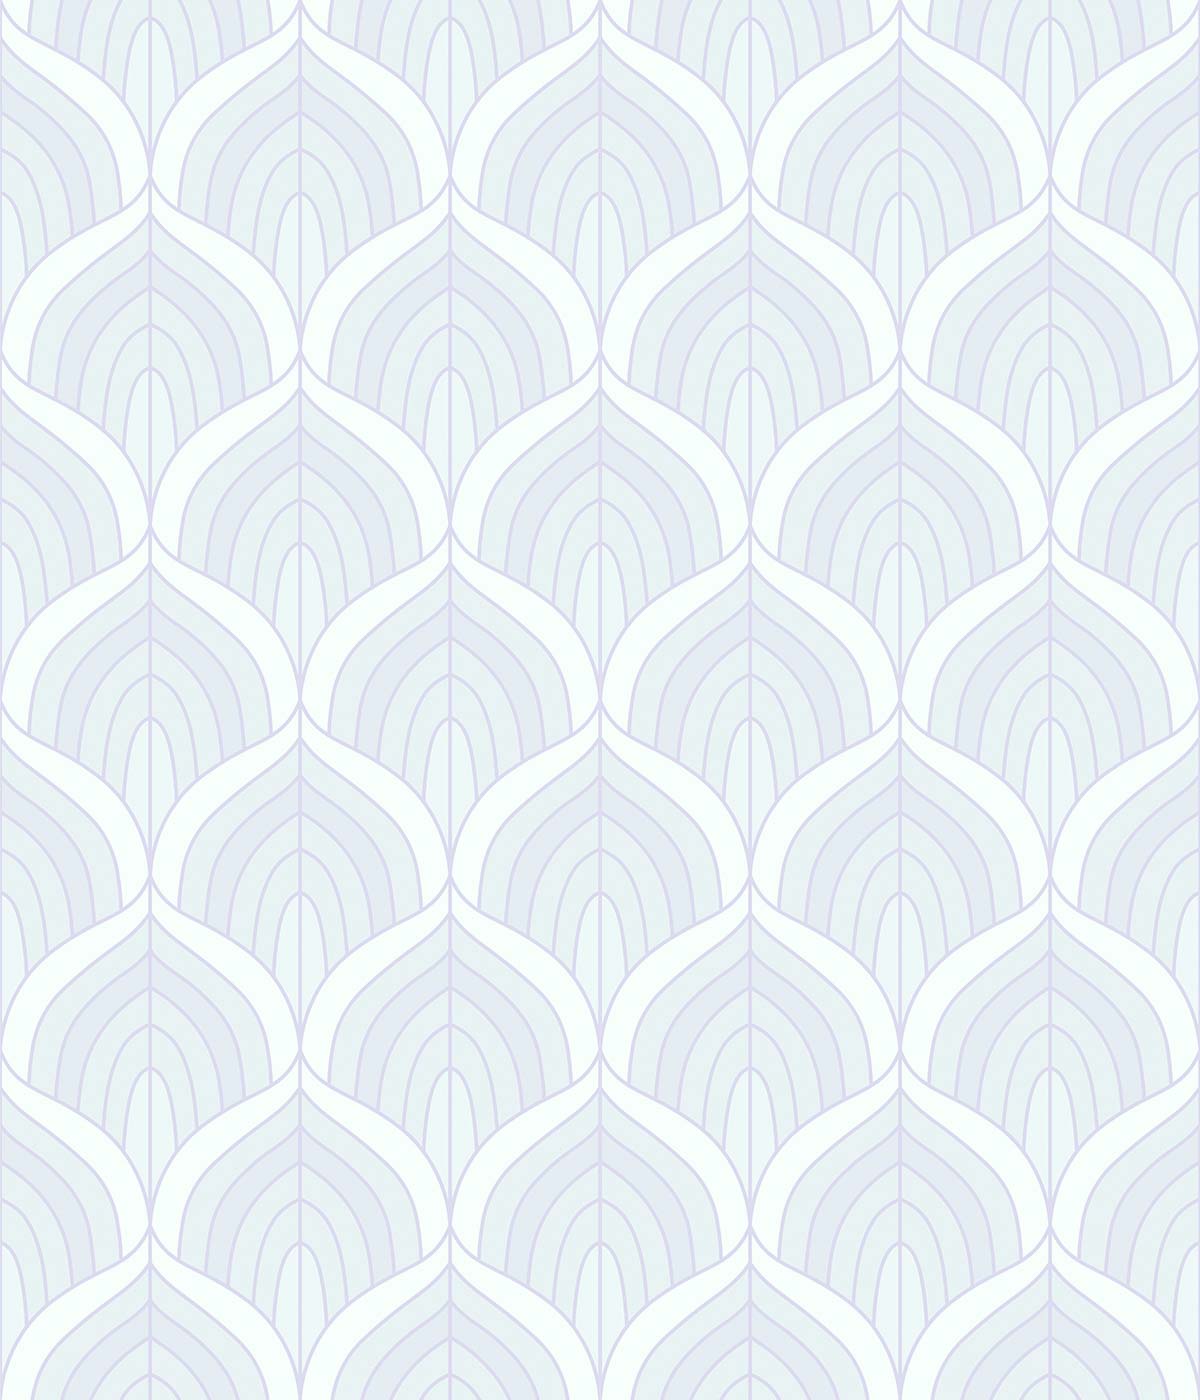 A pattern of lines on a white background